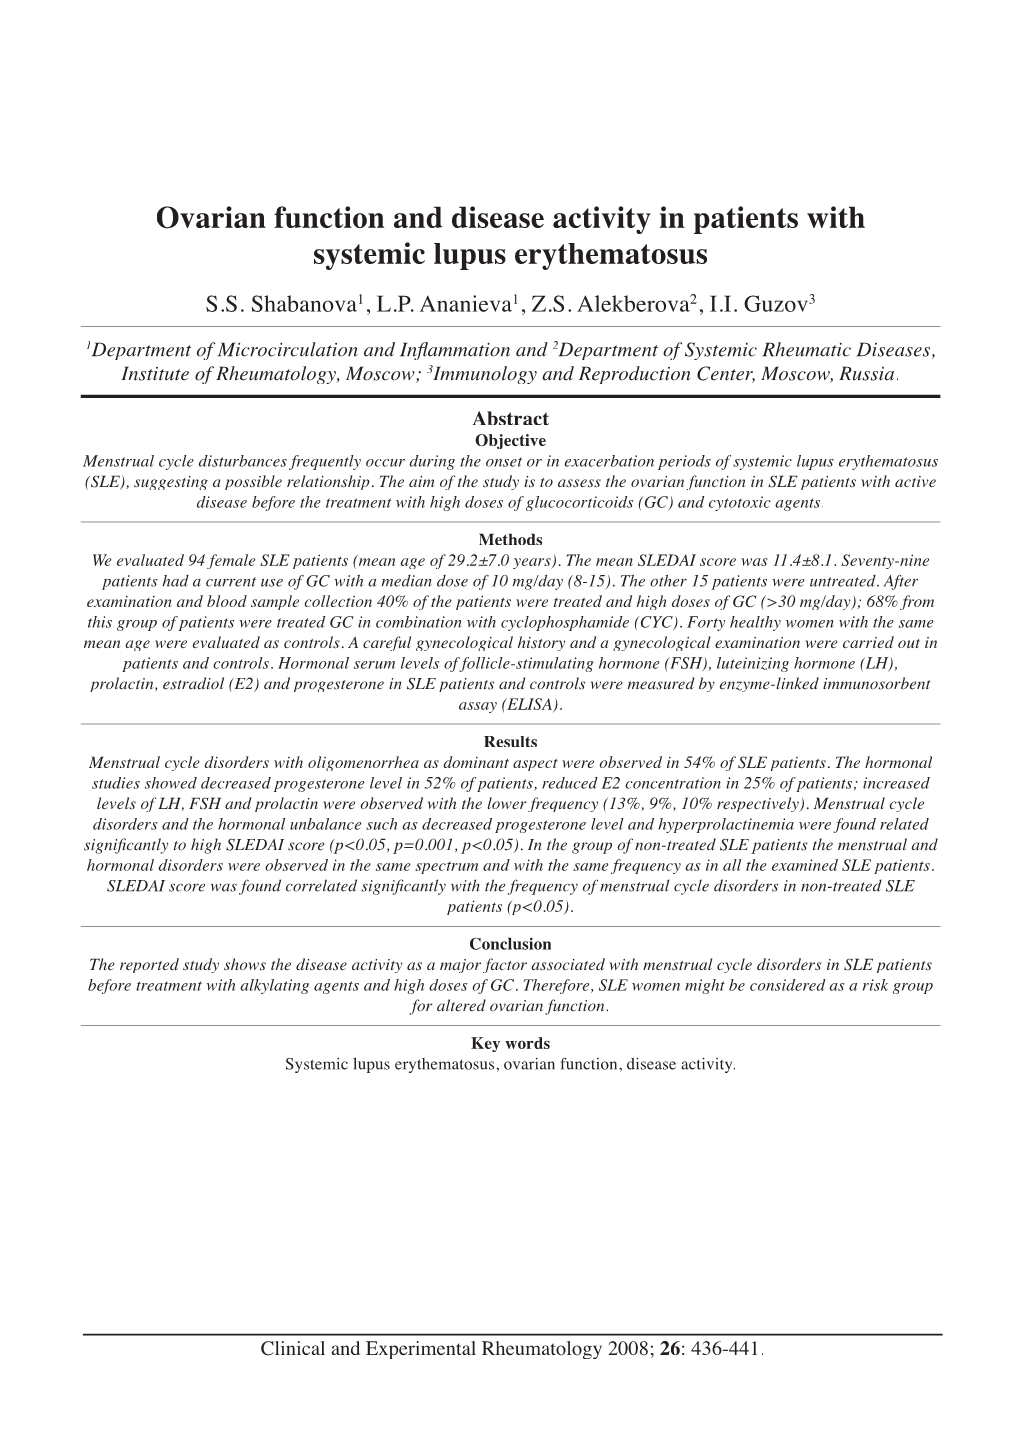 Ovarian Function and Disease Activity in Patients with Systemic Lupus Erythematosus S.S